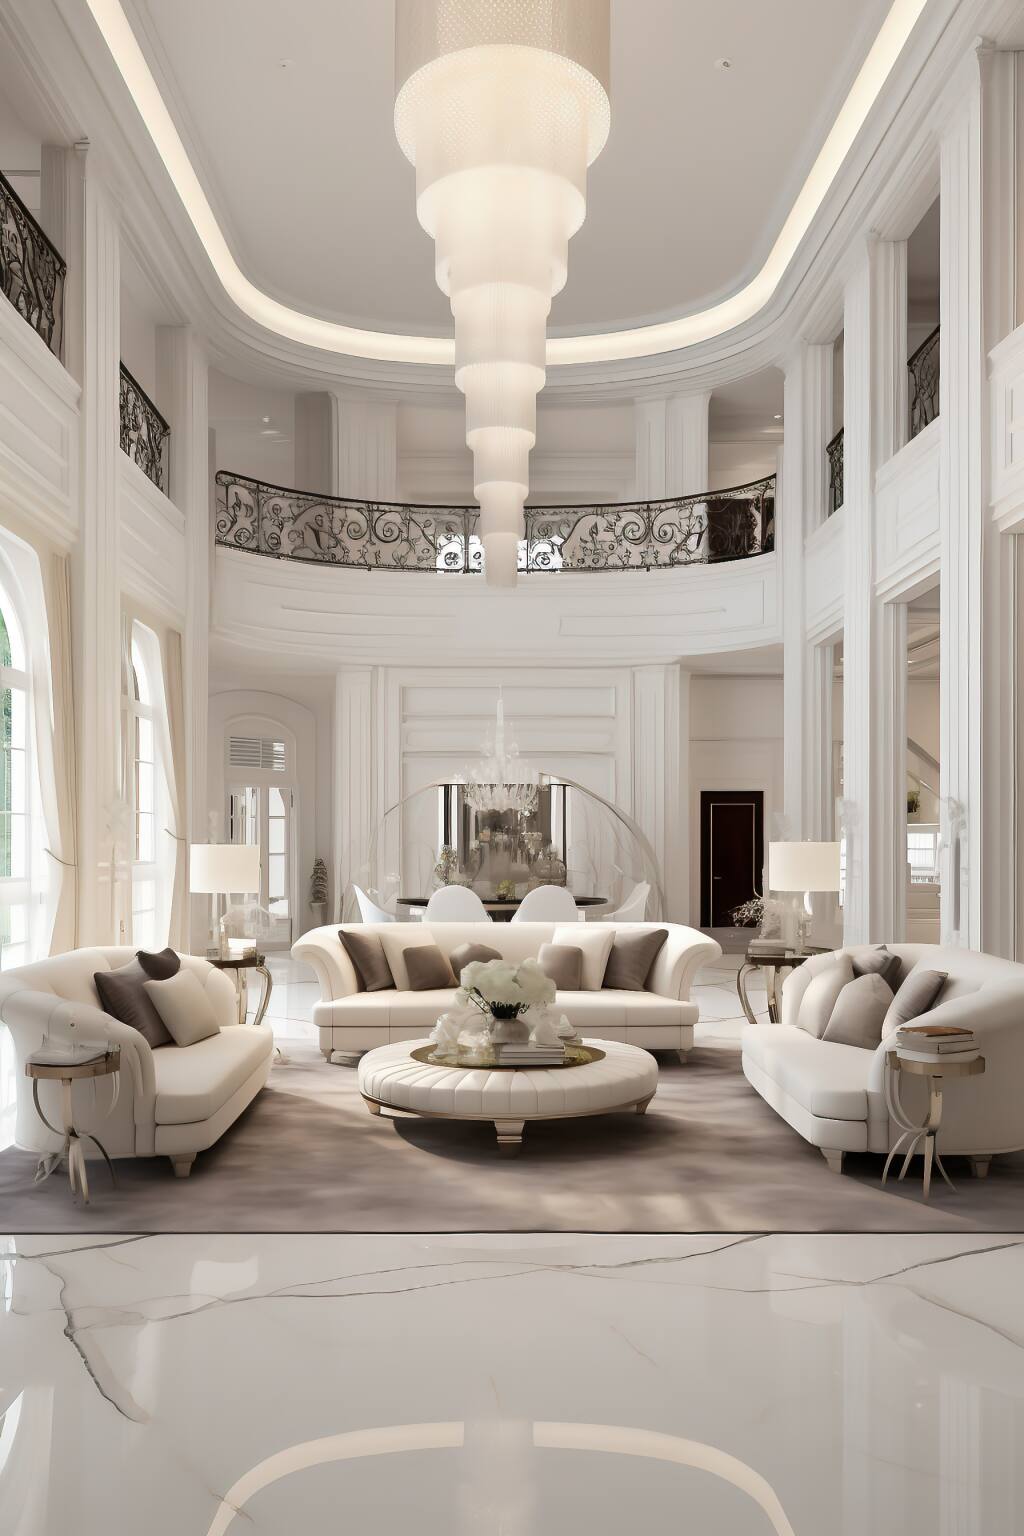 A Serene Luxury Living Room That Combines The Softness Of Ivory With The Sleekness Of Silver, All Tied Together With Polished Marble Flooring.